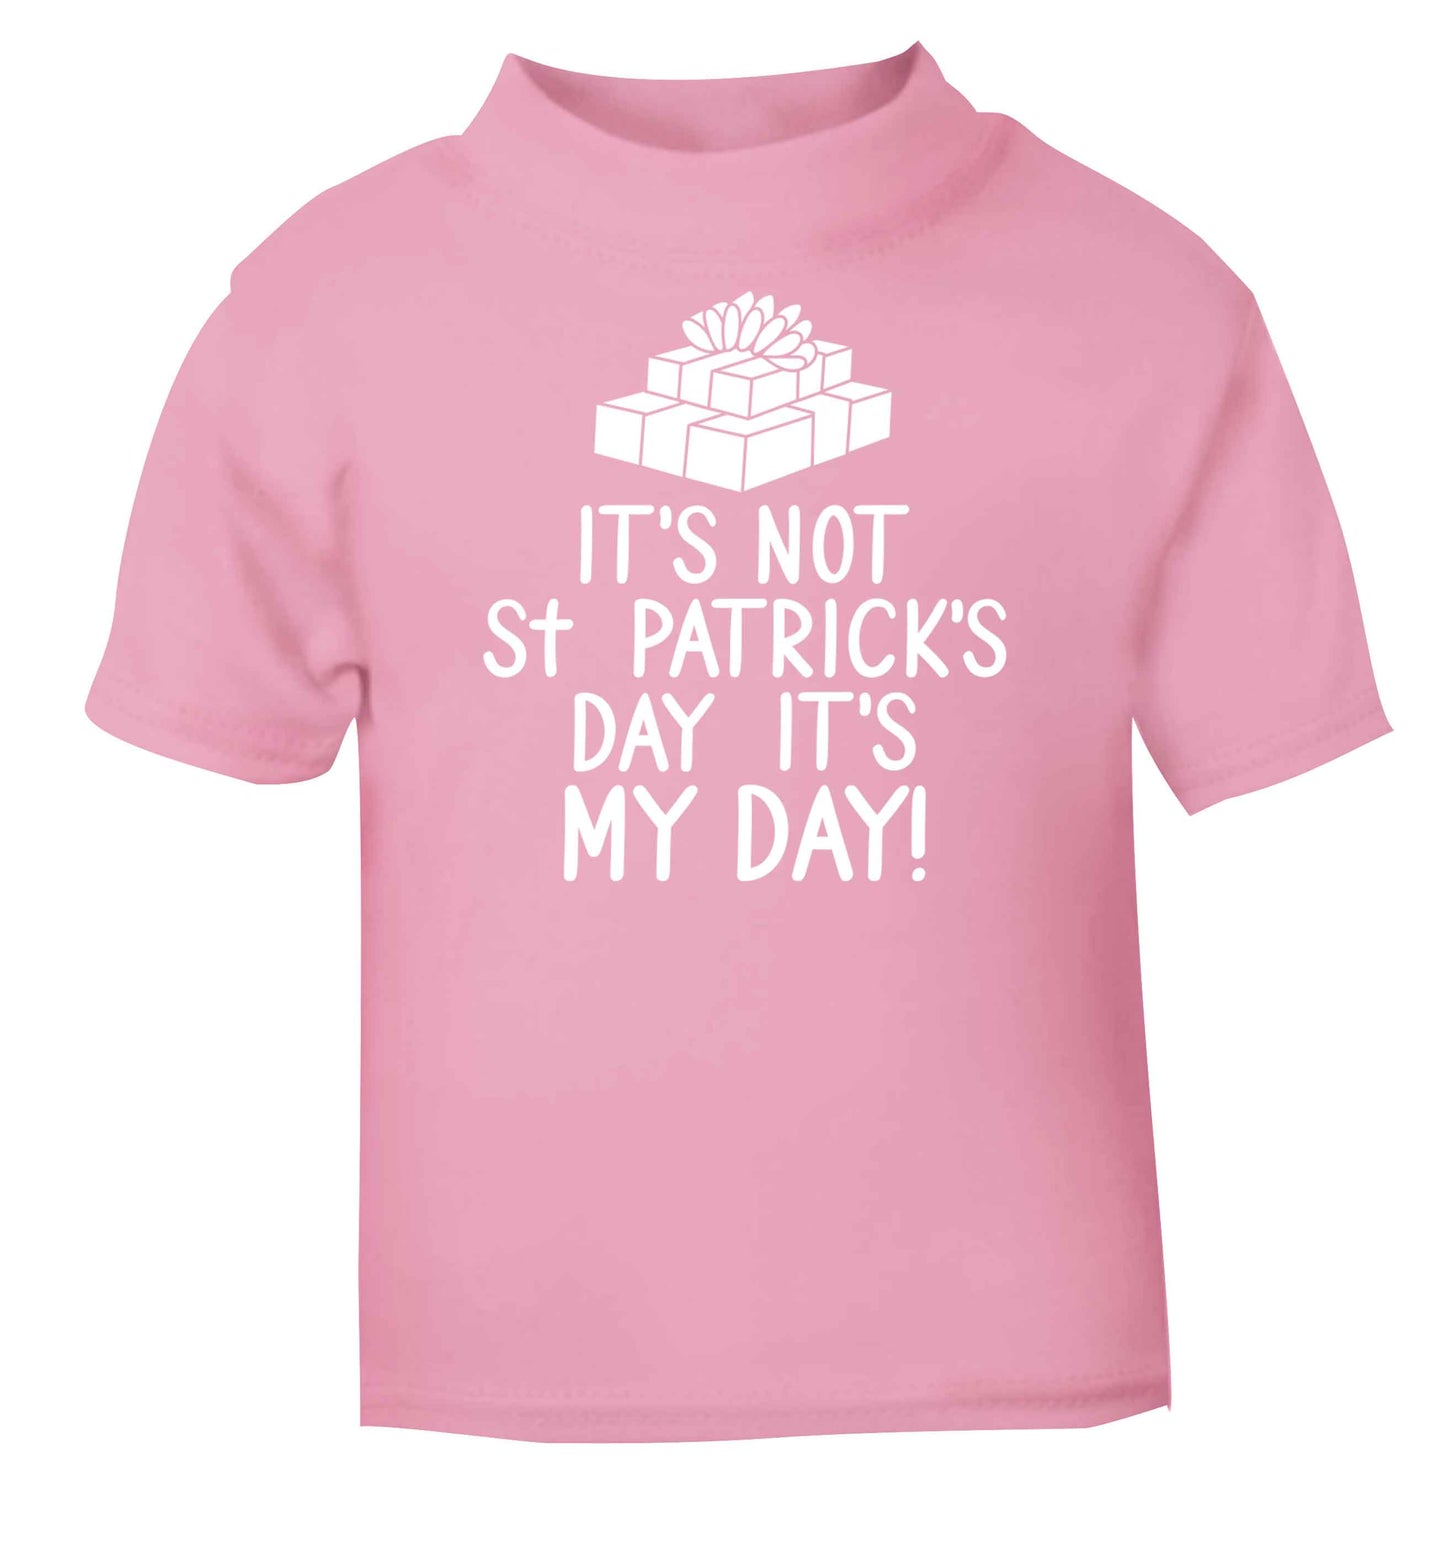 Funny gifts for your mum on mother's dayor her birthday! It's not St Patricks day it's my day light pink baby toddler Tshirt 2 Years